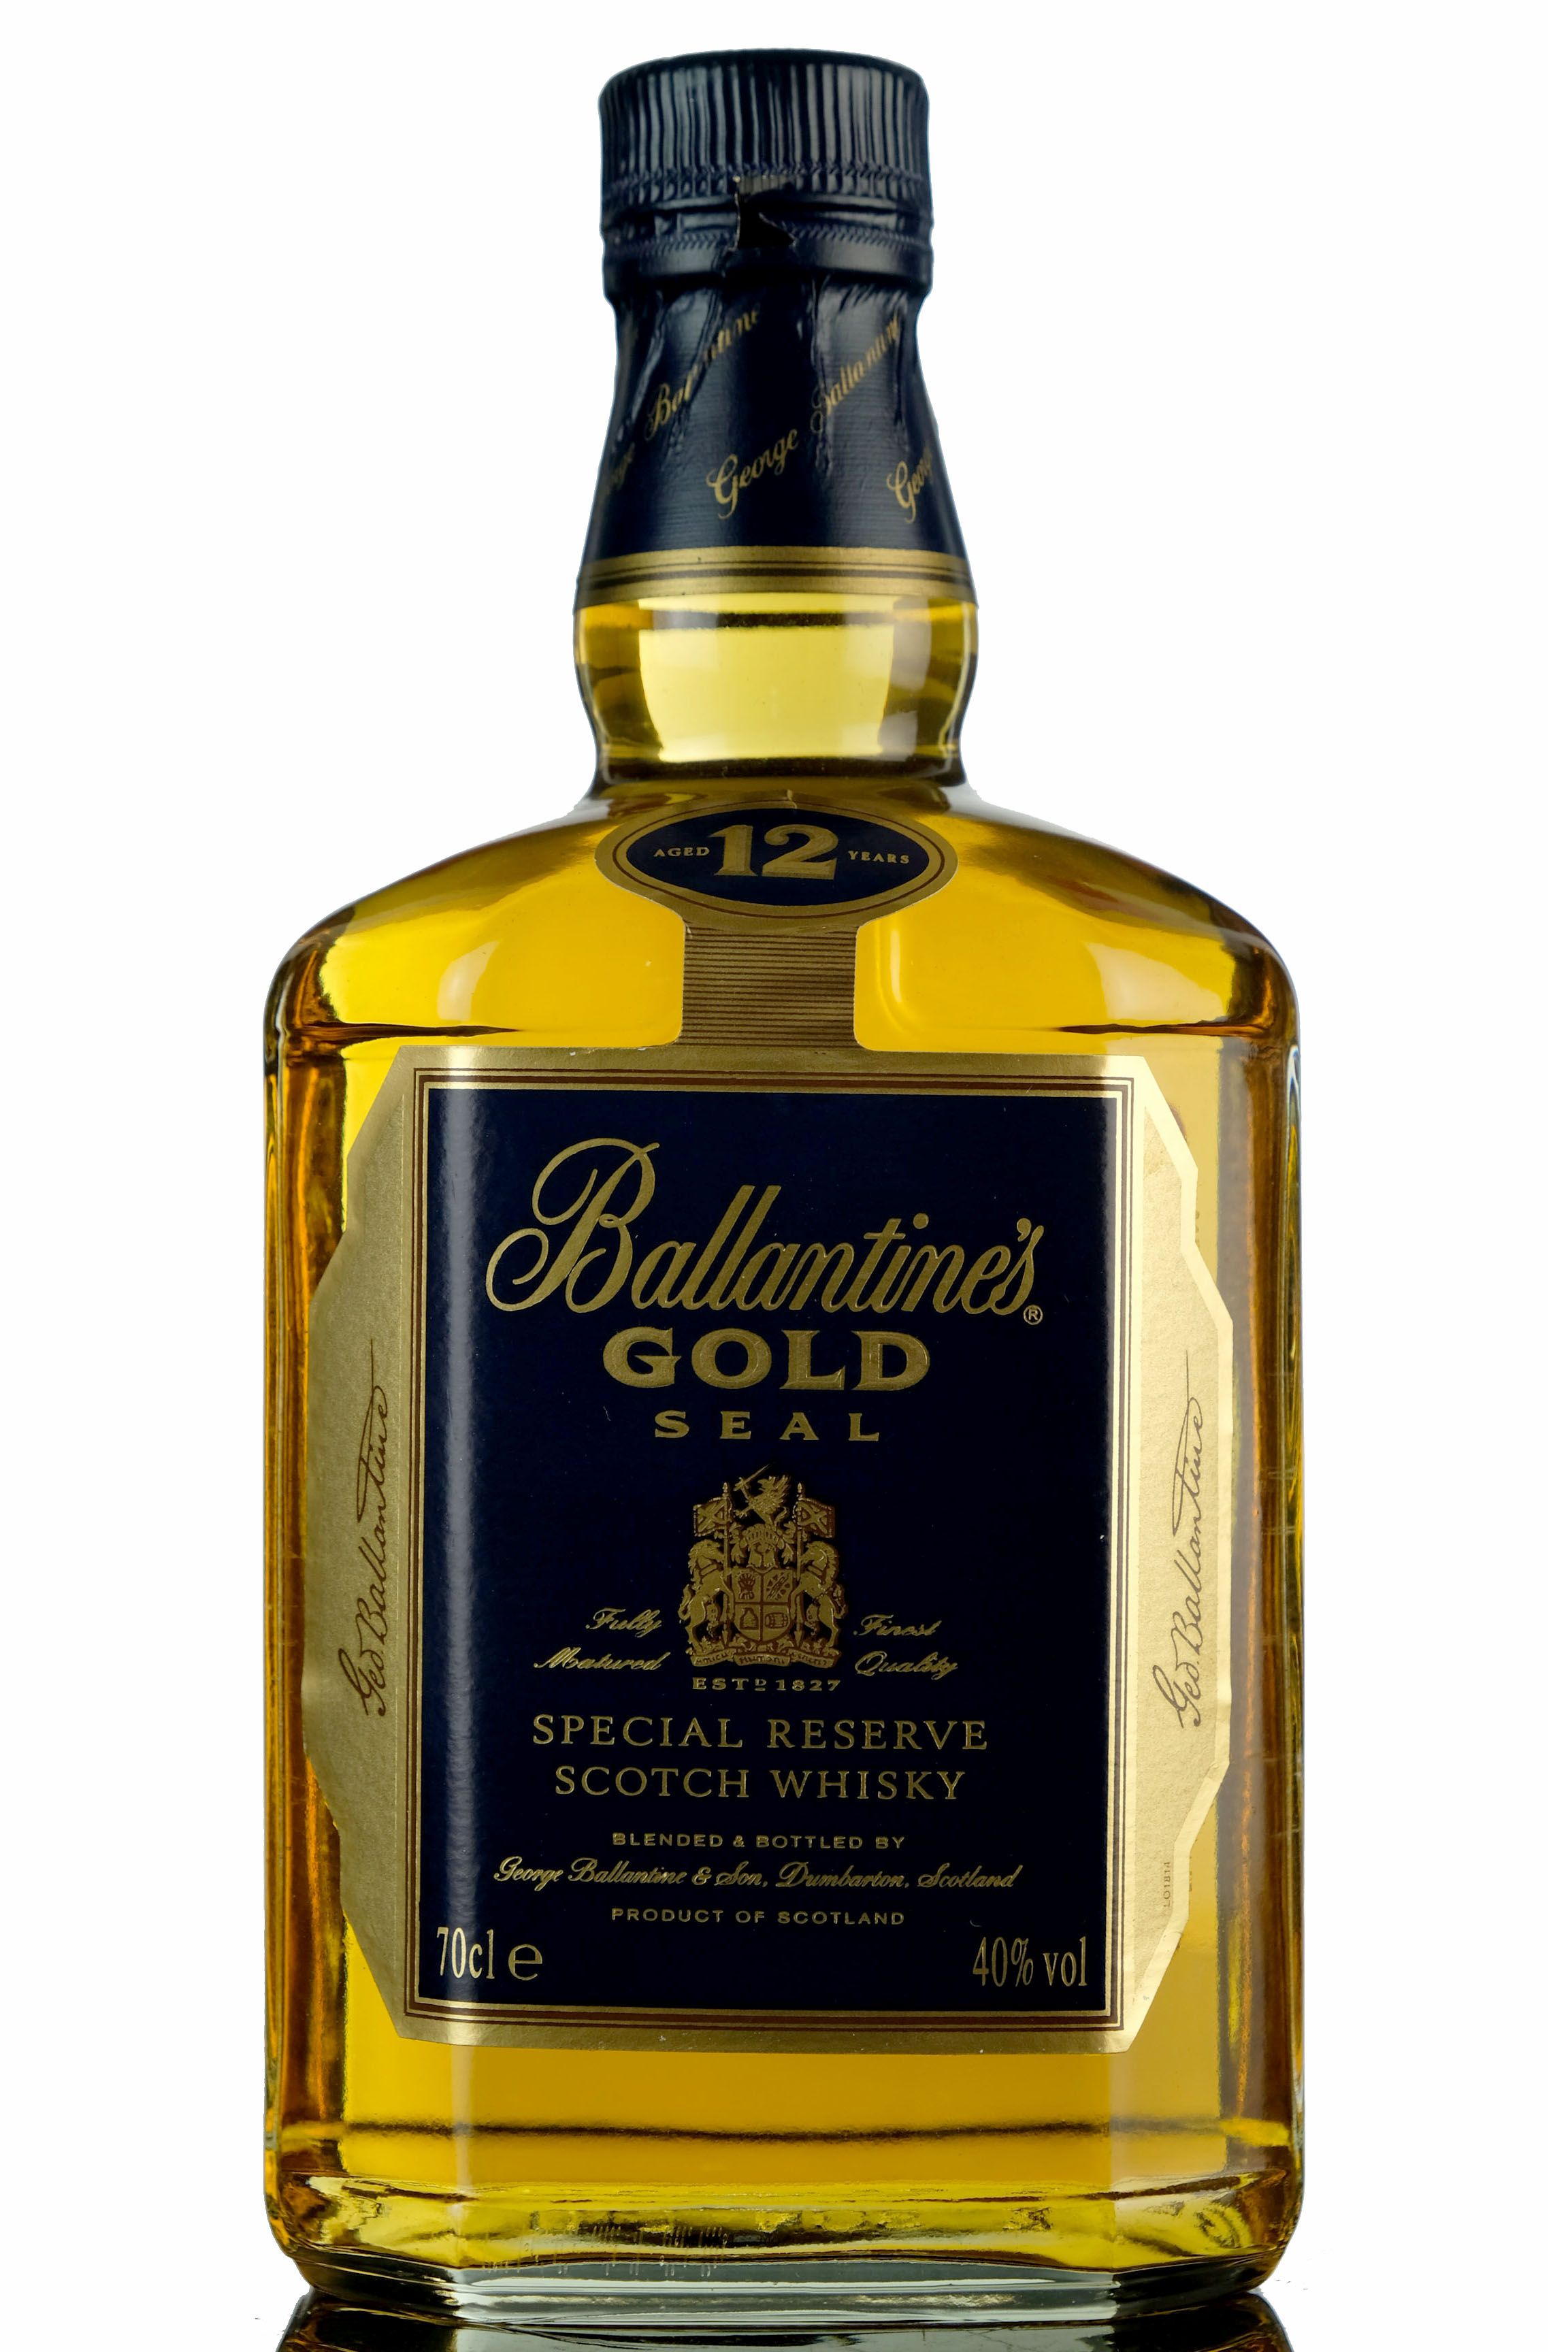 Ballantines 12 Year Old - Gold Seal